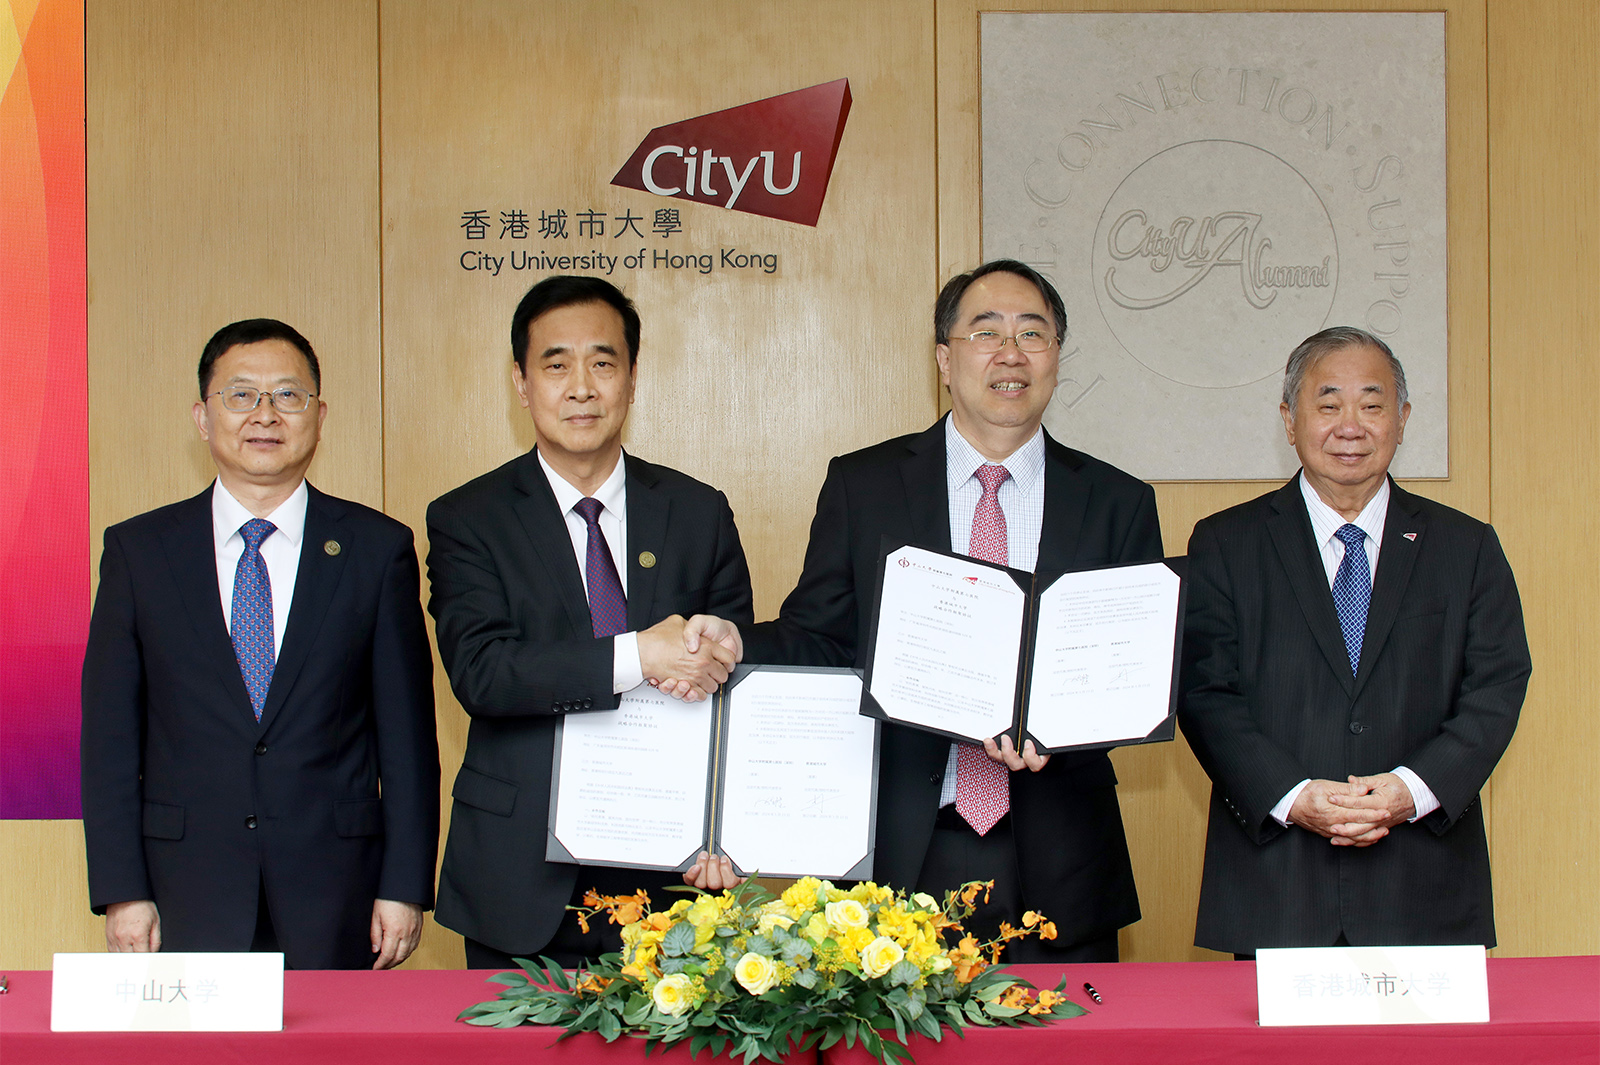 Witnessed by President Boey (first right) and President Gao (first left), Professor Lee (second right) and Professor He (second left) sign a strategic cooperation framework agreement to jointly promote the development of life sciences, digital medicine, computer science, biomedical engineering, and other disciplines.